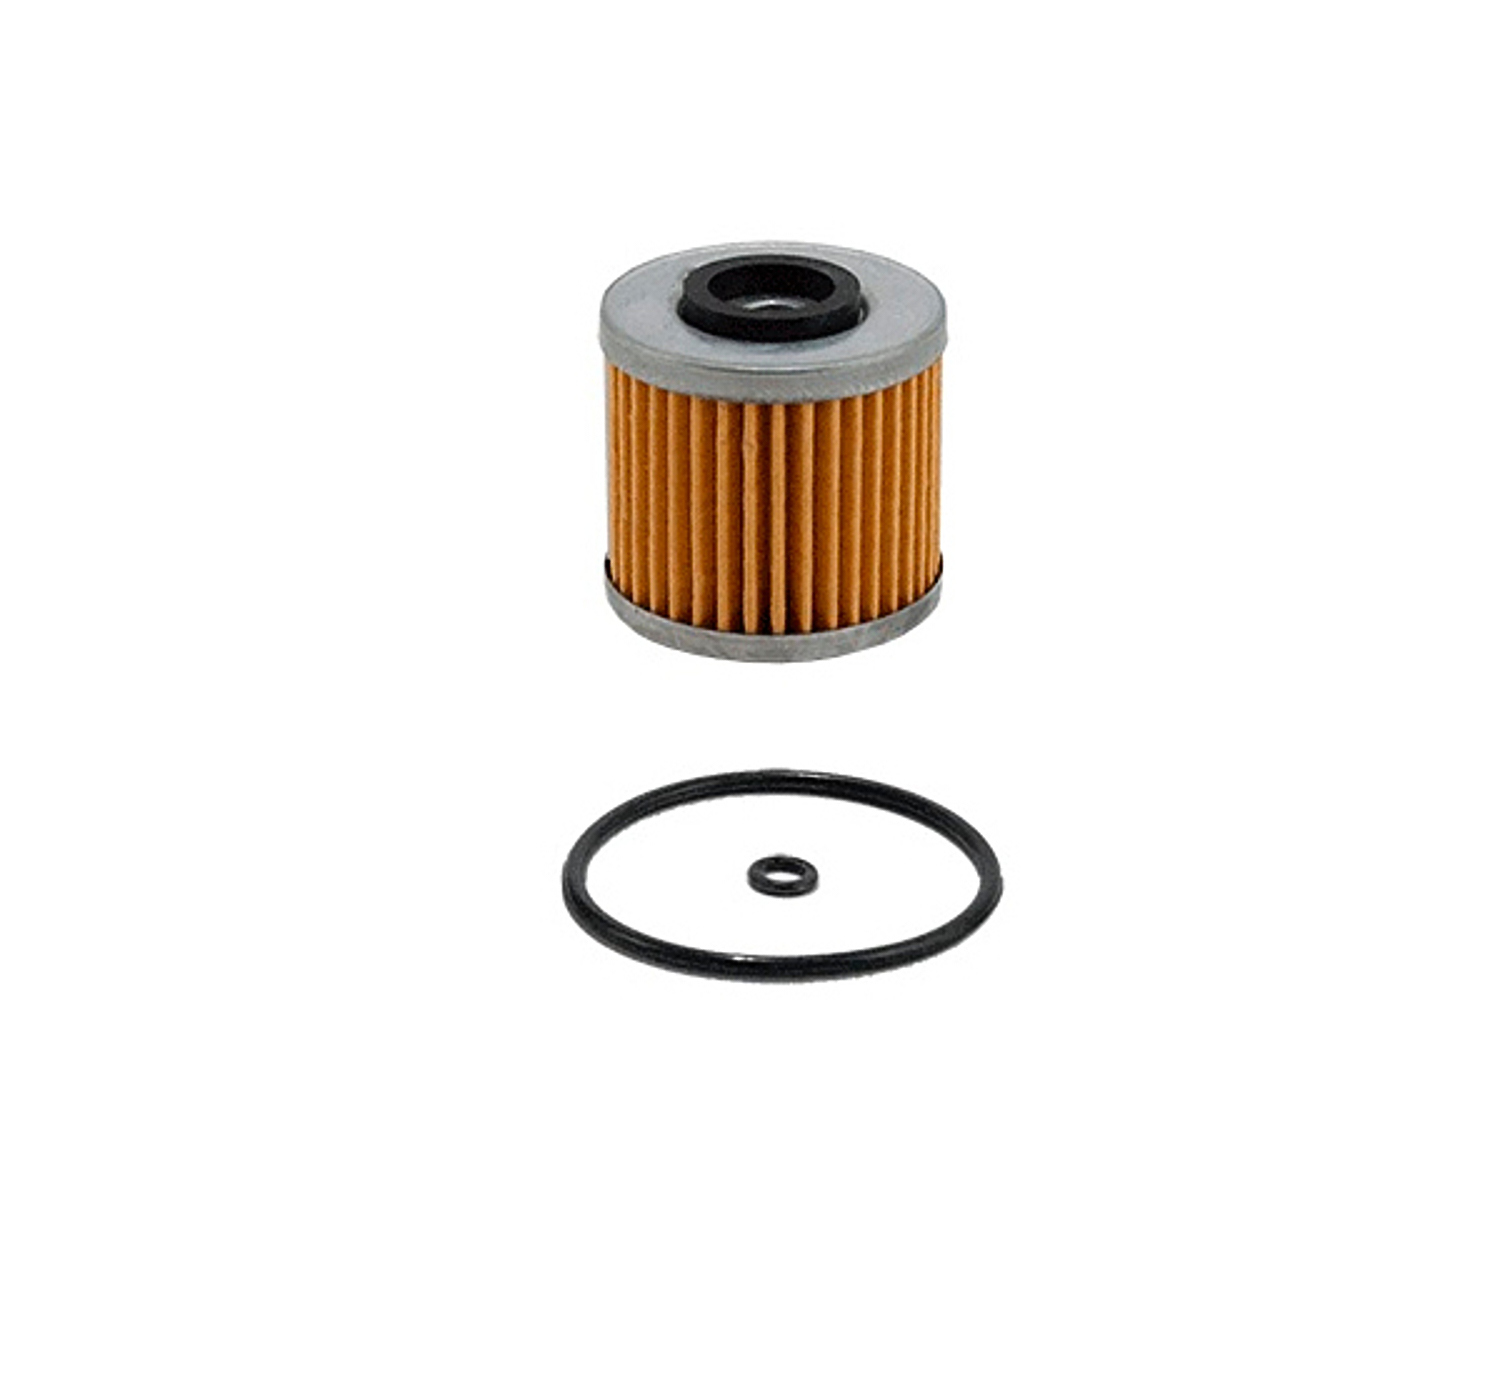 Wix Filters 24936 Oil Filter, Cartridge, 2.252 in Tall, 2.170 in Diameter, 15 Micron, Yamaha Motorcycles, Each